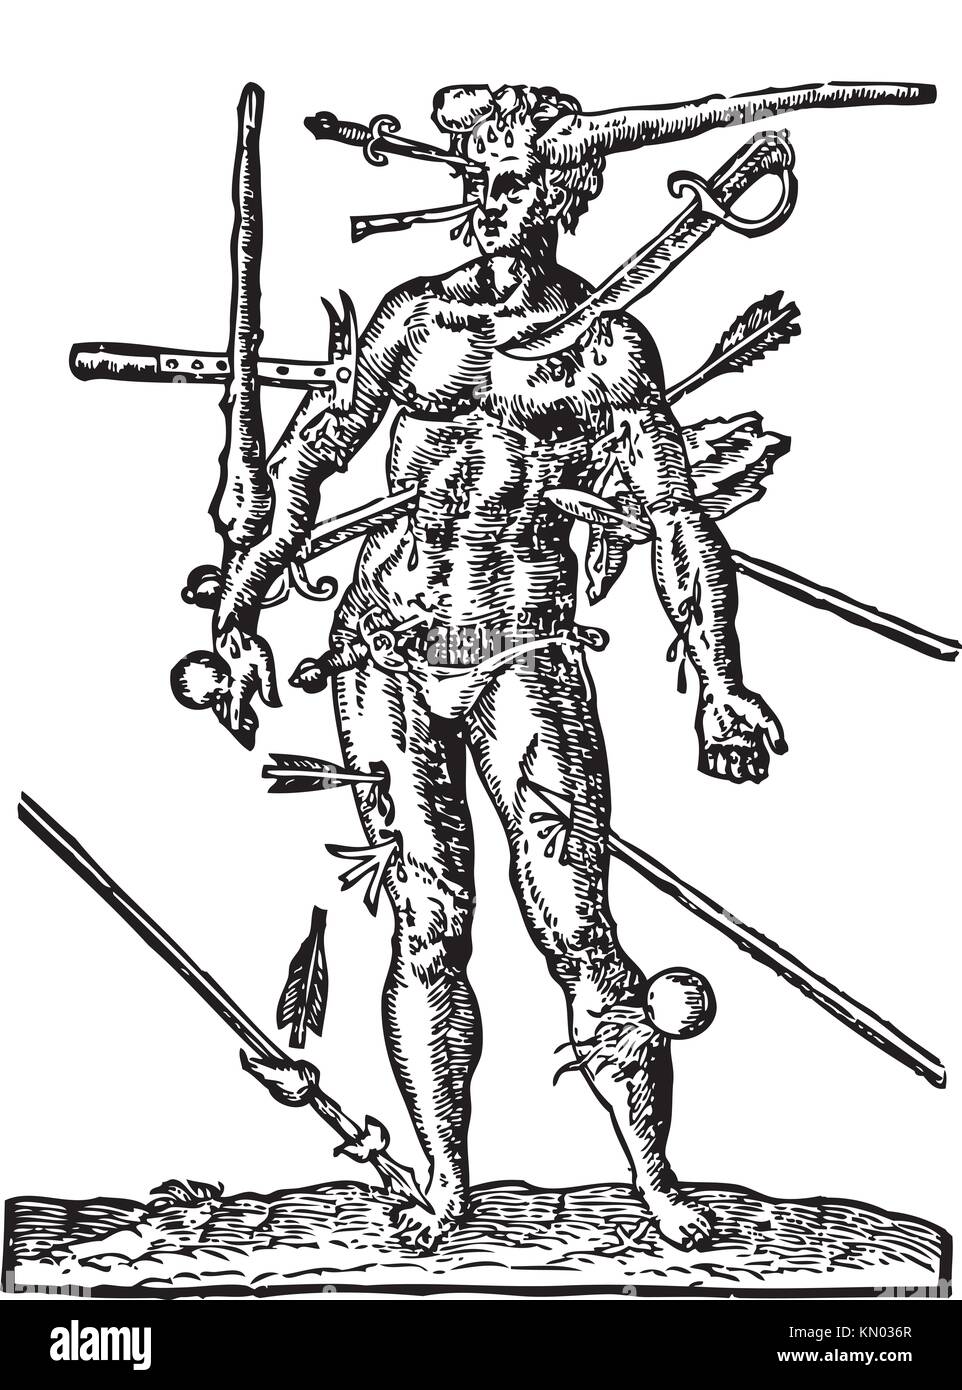 The Man of Wounds old engraving Illustration from the Opera Chirurgica, by Ambroise Paré 1594  Shows a man with multiple wounds made by weapons, such Stock Photo